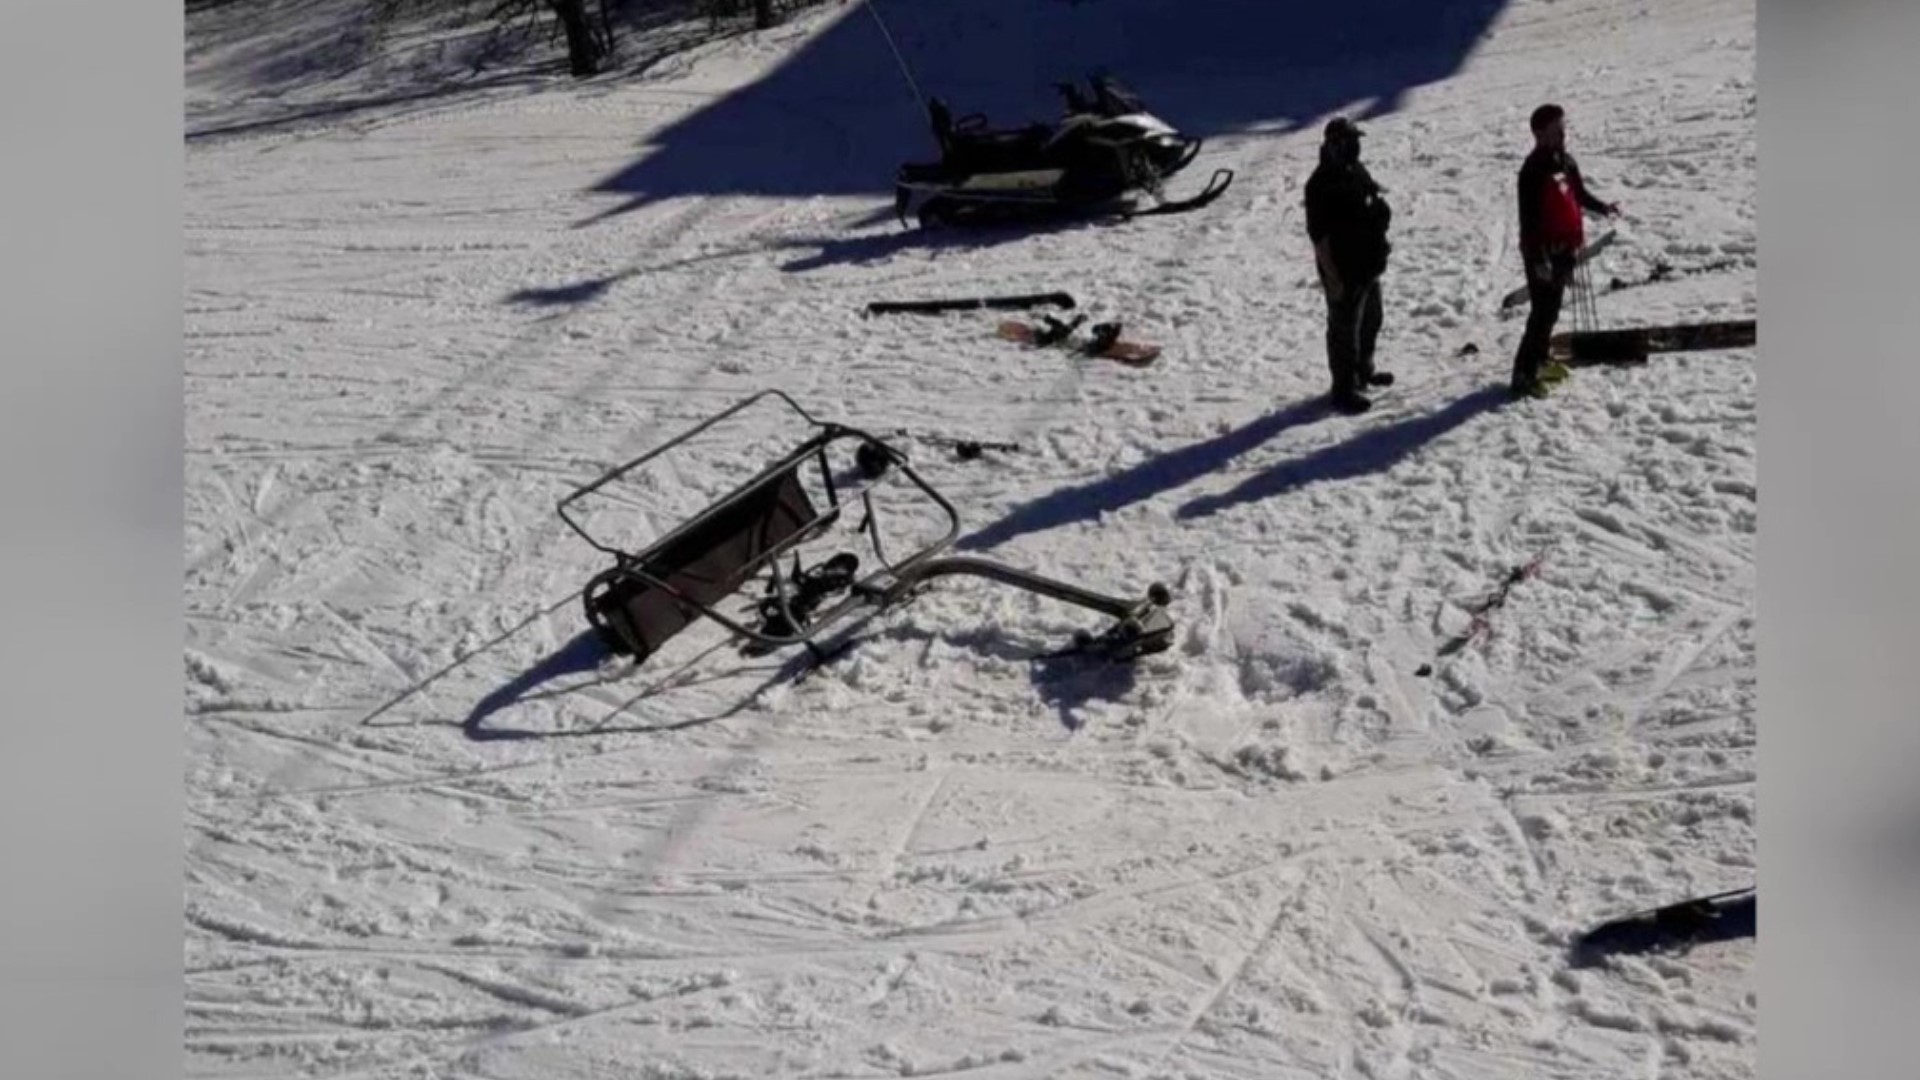 A father and his two children were hurt after the ski lift they were riding at Camelback Resort near Tannersville detached and crashed to the ground.